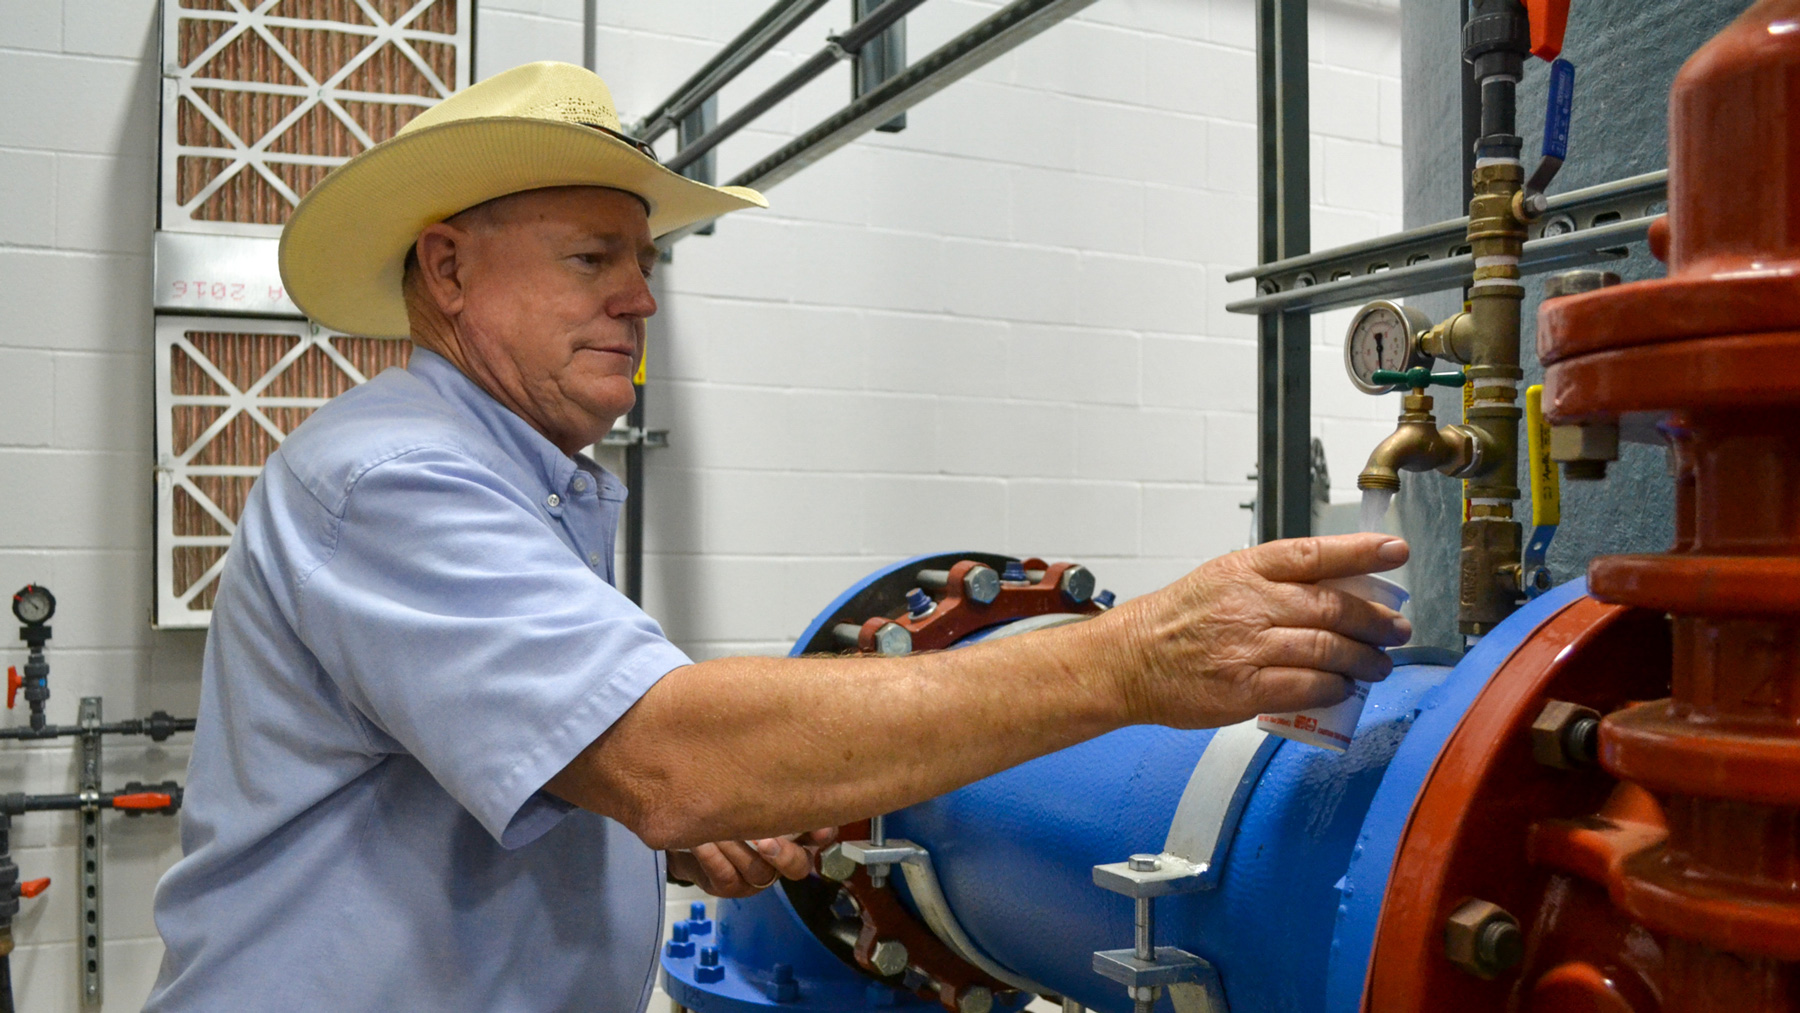 Public Works Director Doug Hutcheson fills a cup with water at the water treatment plant in Wolfforth, Texas. “We've tried to comply. We're team players. We're wanting to fix it and get it on down the road,” he said. (Elizabeth Sims/News21)